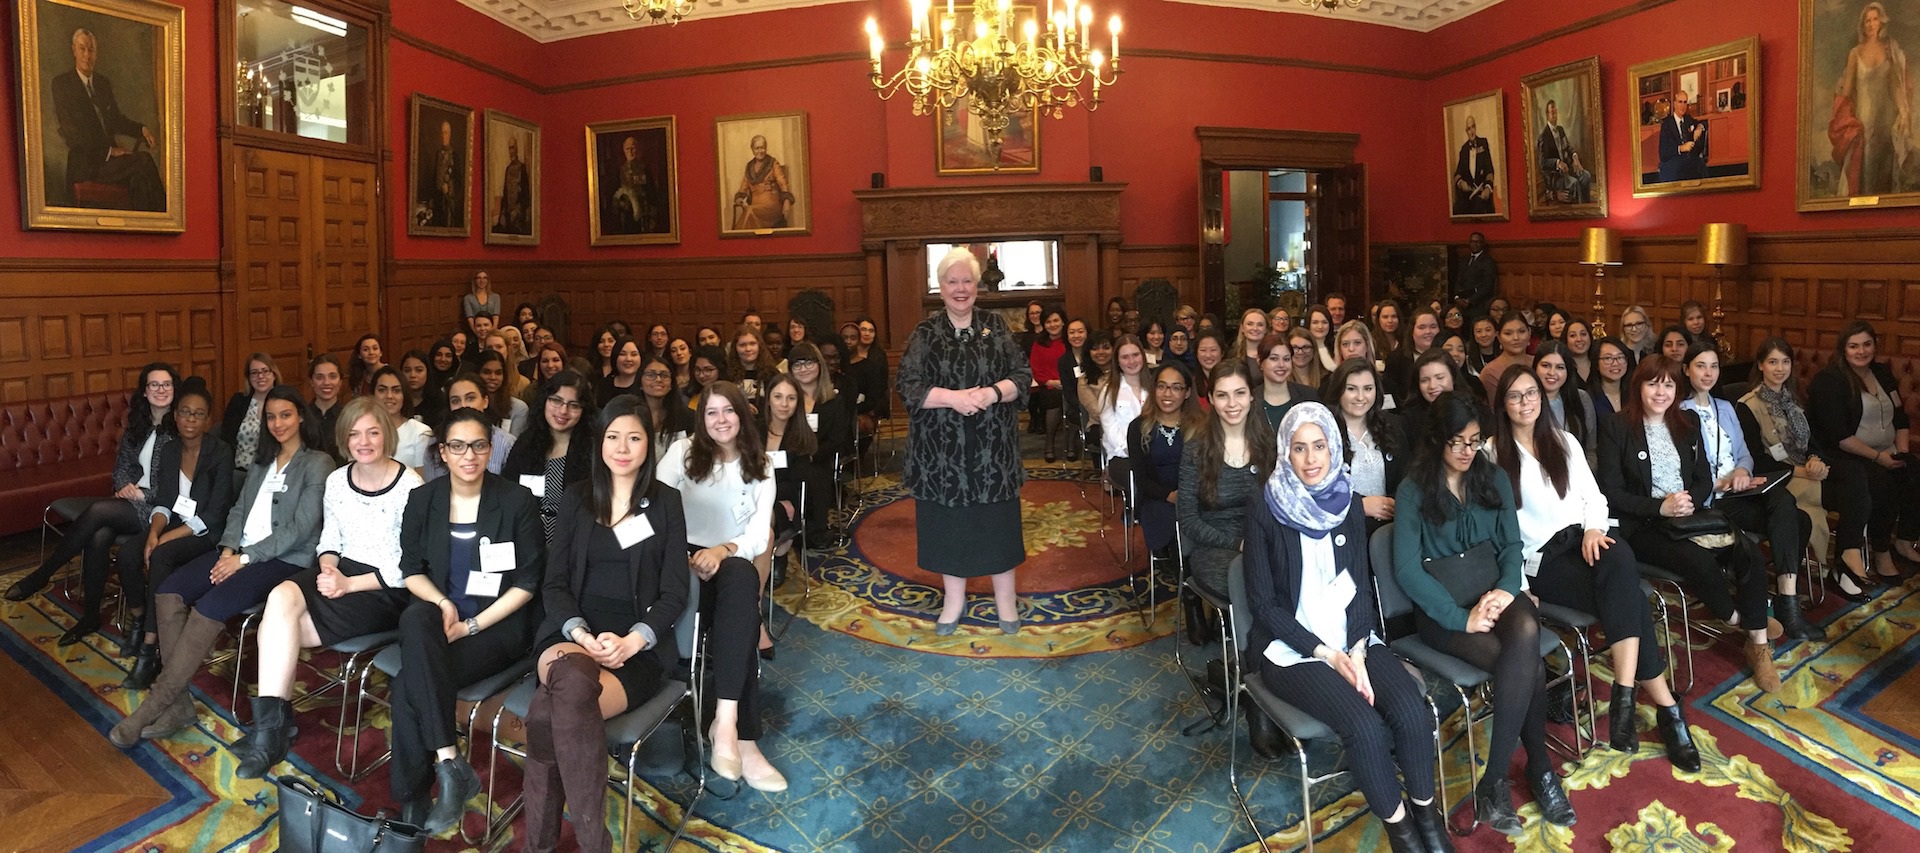 The Lieutenant Governor poses with Ontario delegates to the Daughters of the Vote conference and parliamentary simulation.